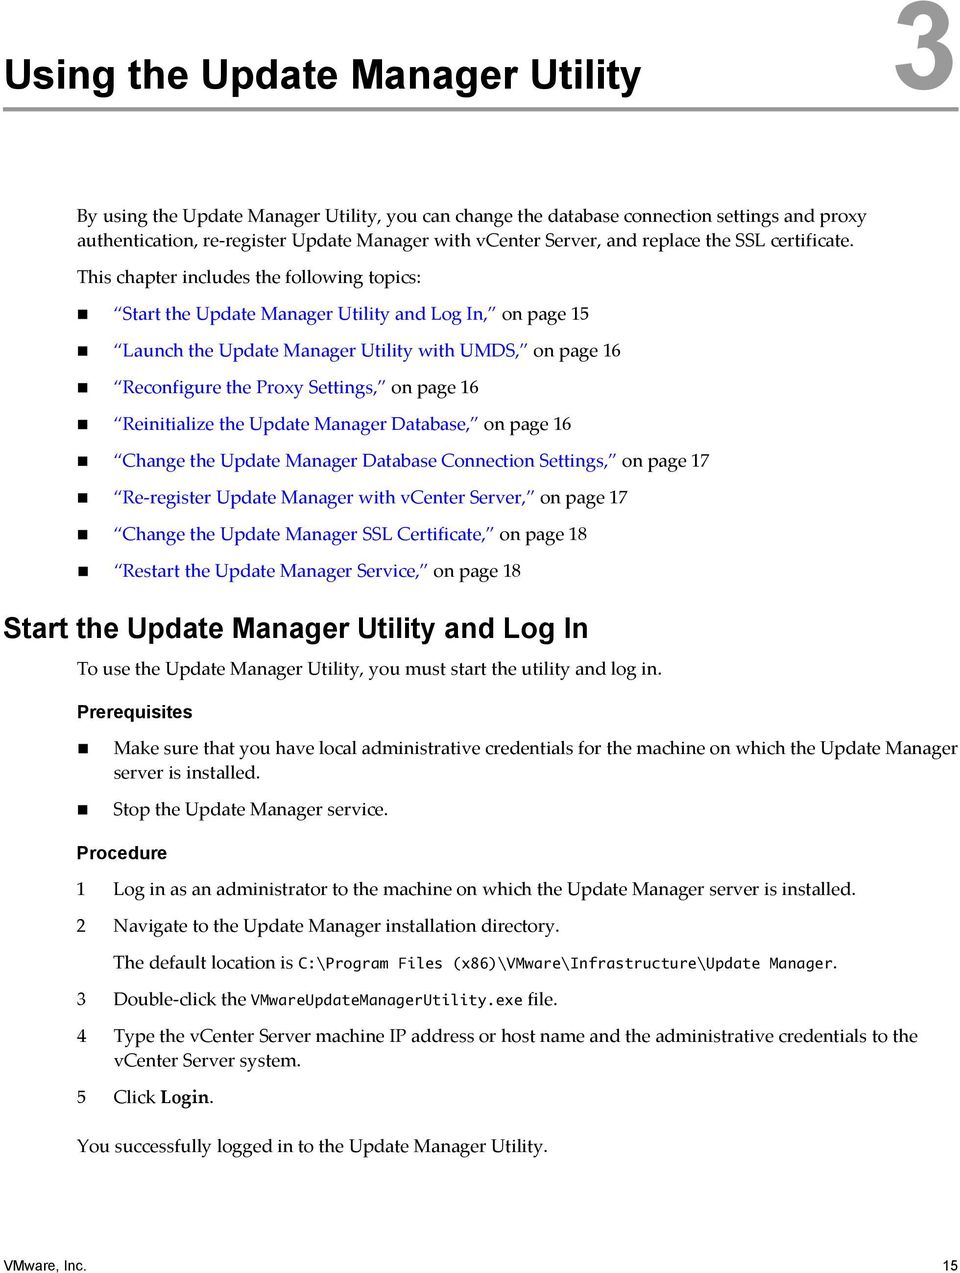 This chapter includes the following topics: Start the Update Manager Utility and Log In, on page 15 Launch the Update Manager Utility with UMDS, on page 16 Reconfigure the Proxy Settings, on page 16